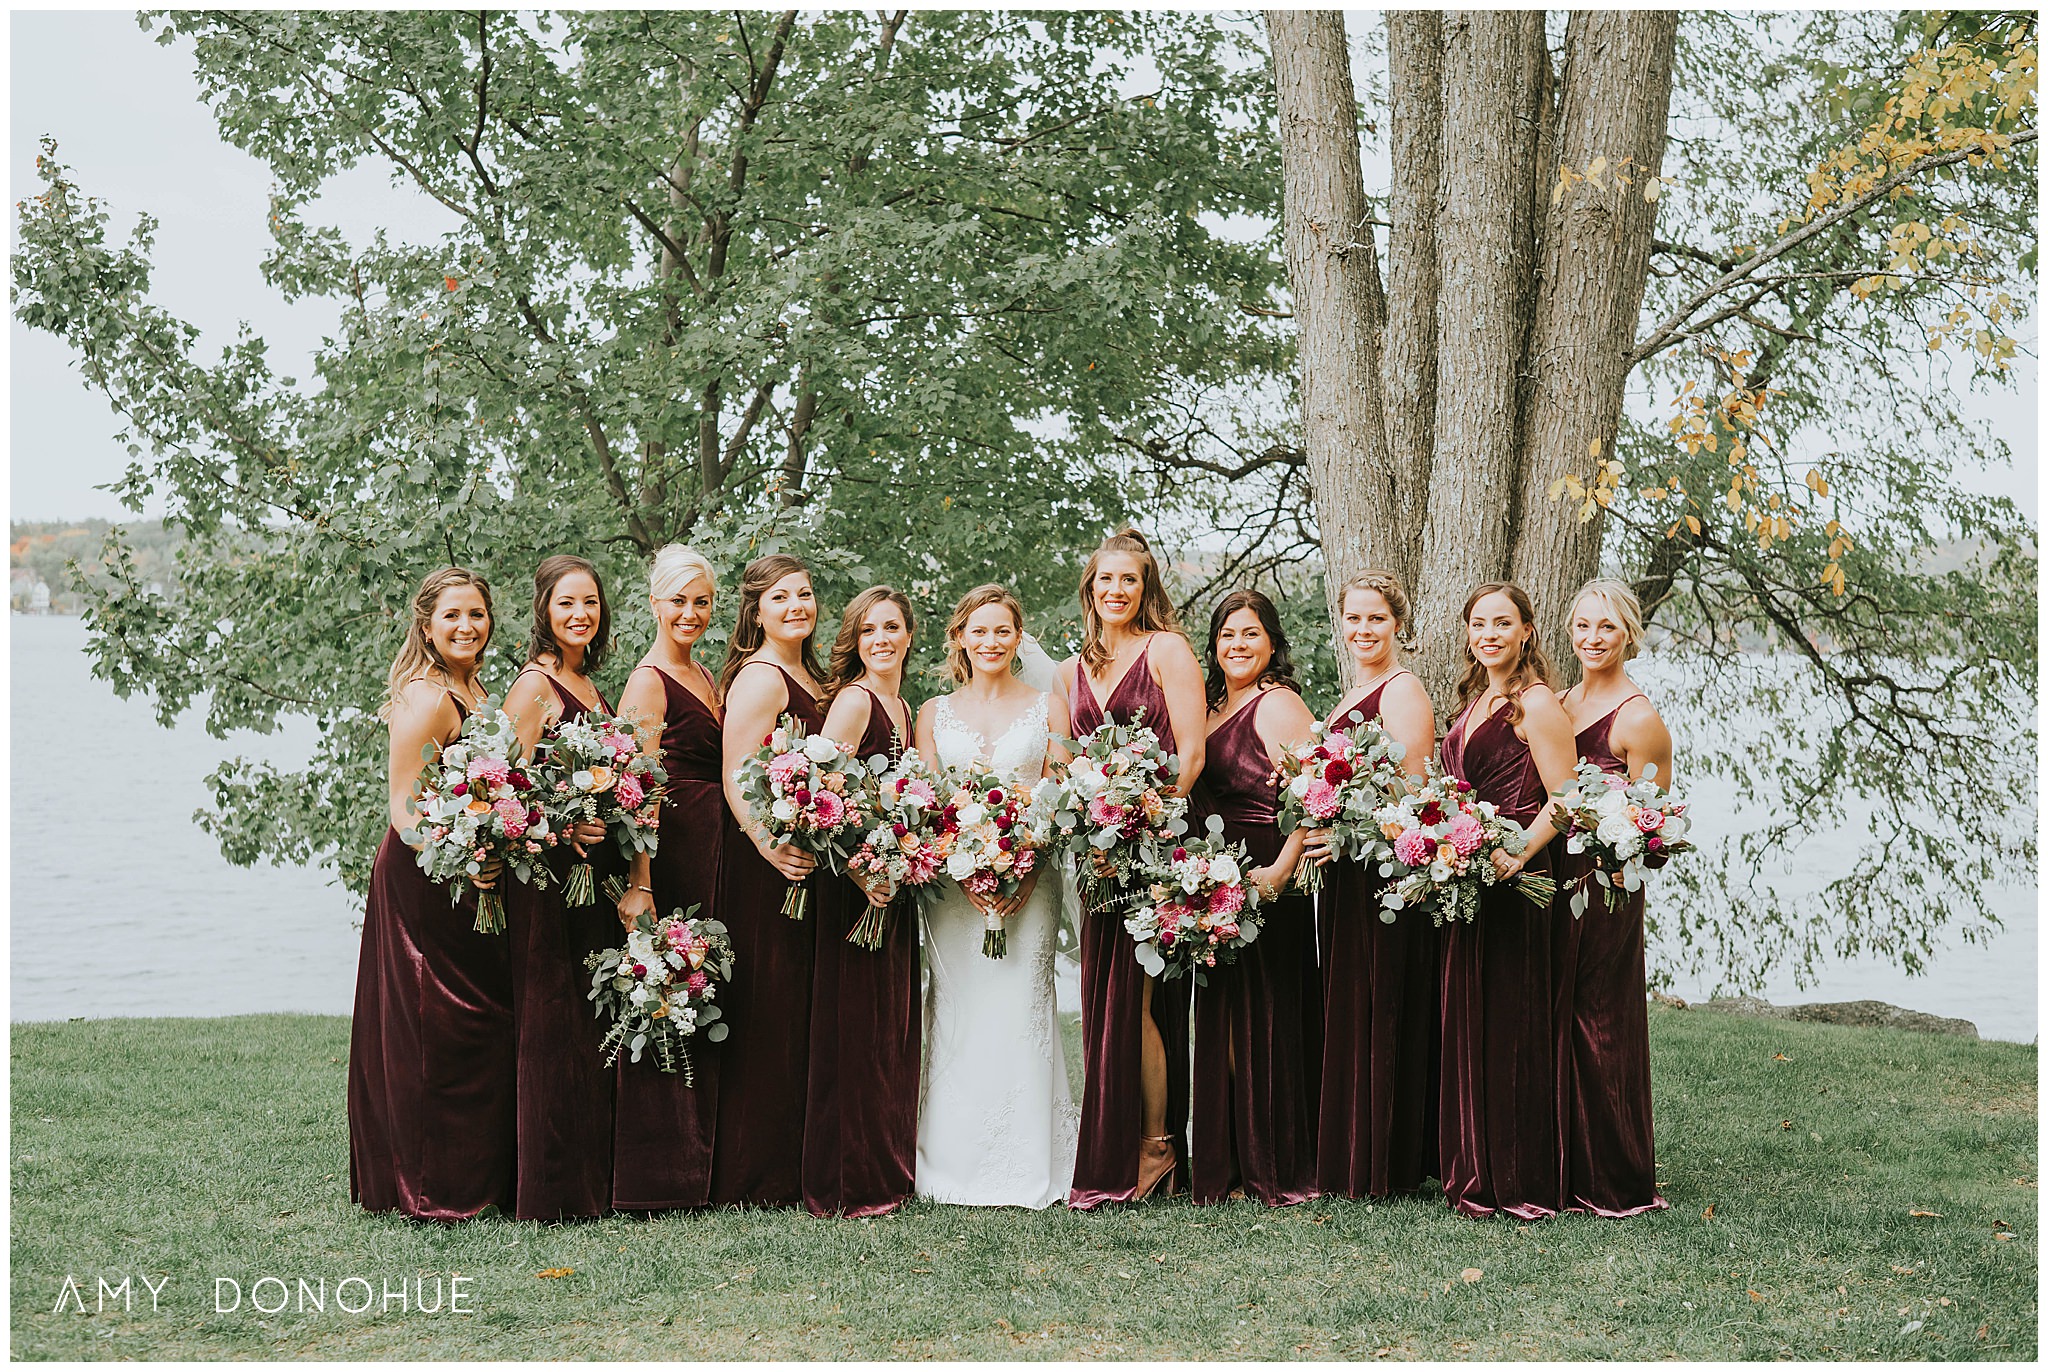 Wedding Party Portraits | New Hampshire Wedding Photographer | Church Landing at Mill Falls, New Hampshire | © Amy Donohue Photography